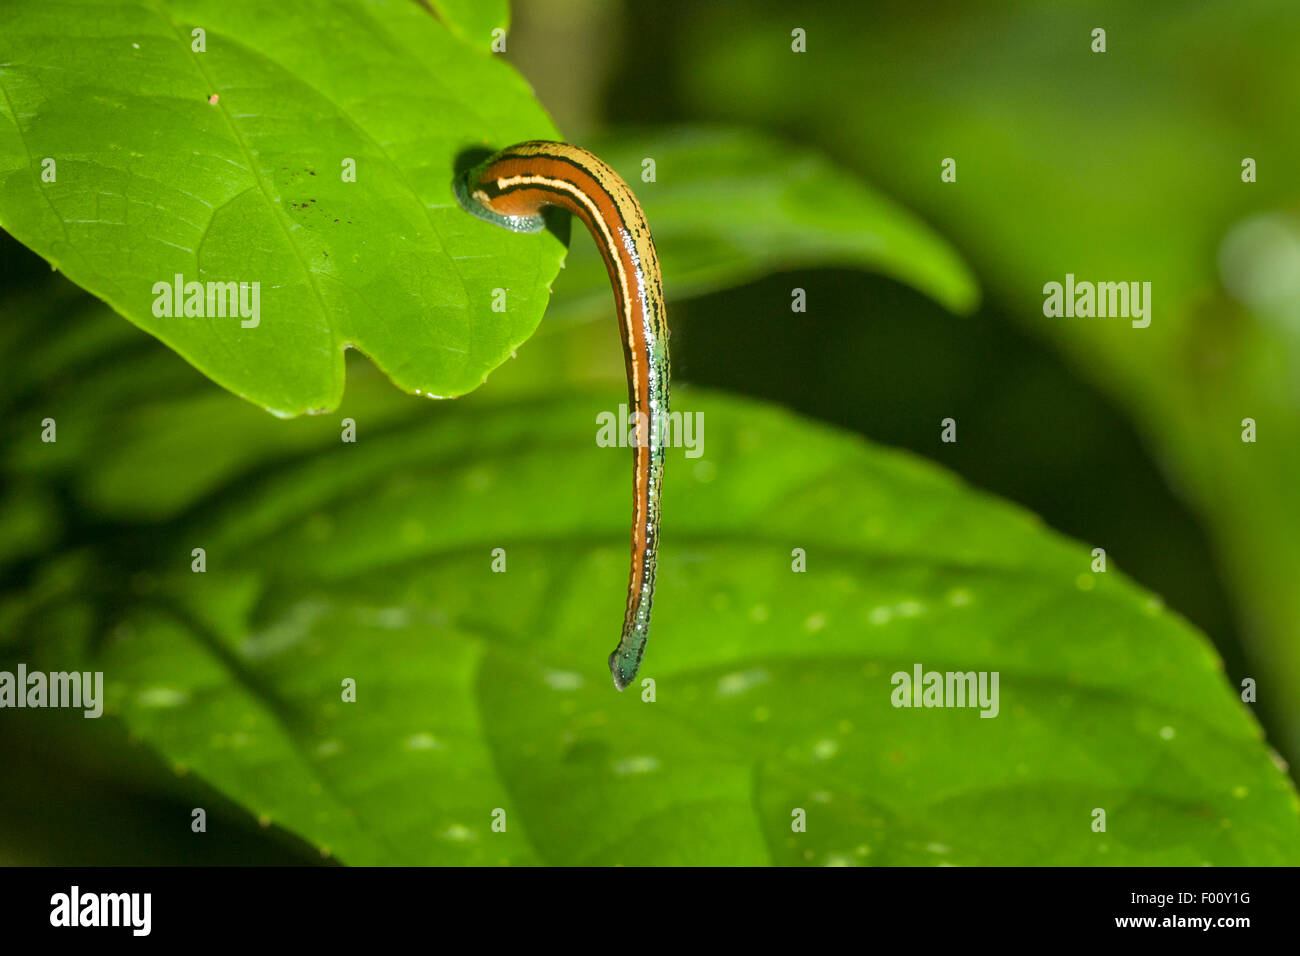 A colorful land leech perched on a leaf, waiting for a host to brush by.  The sucker disc is clearly visible. Stock Photo